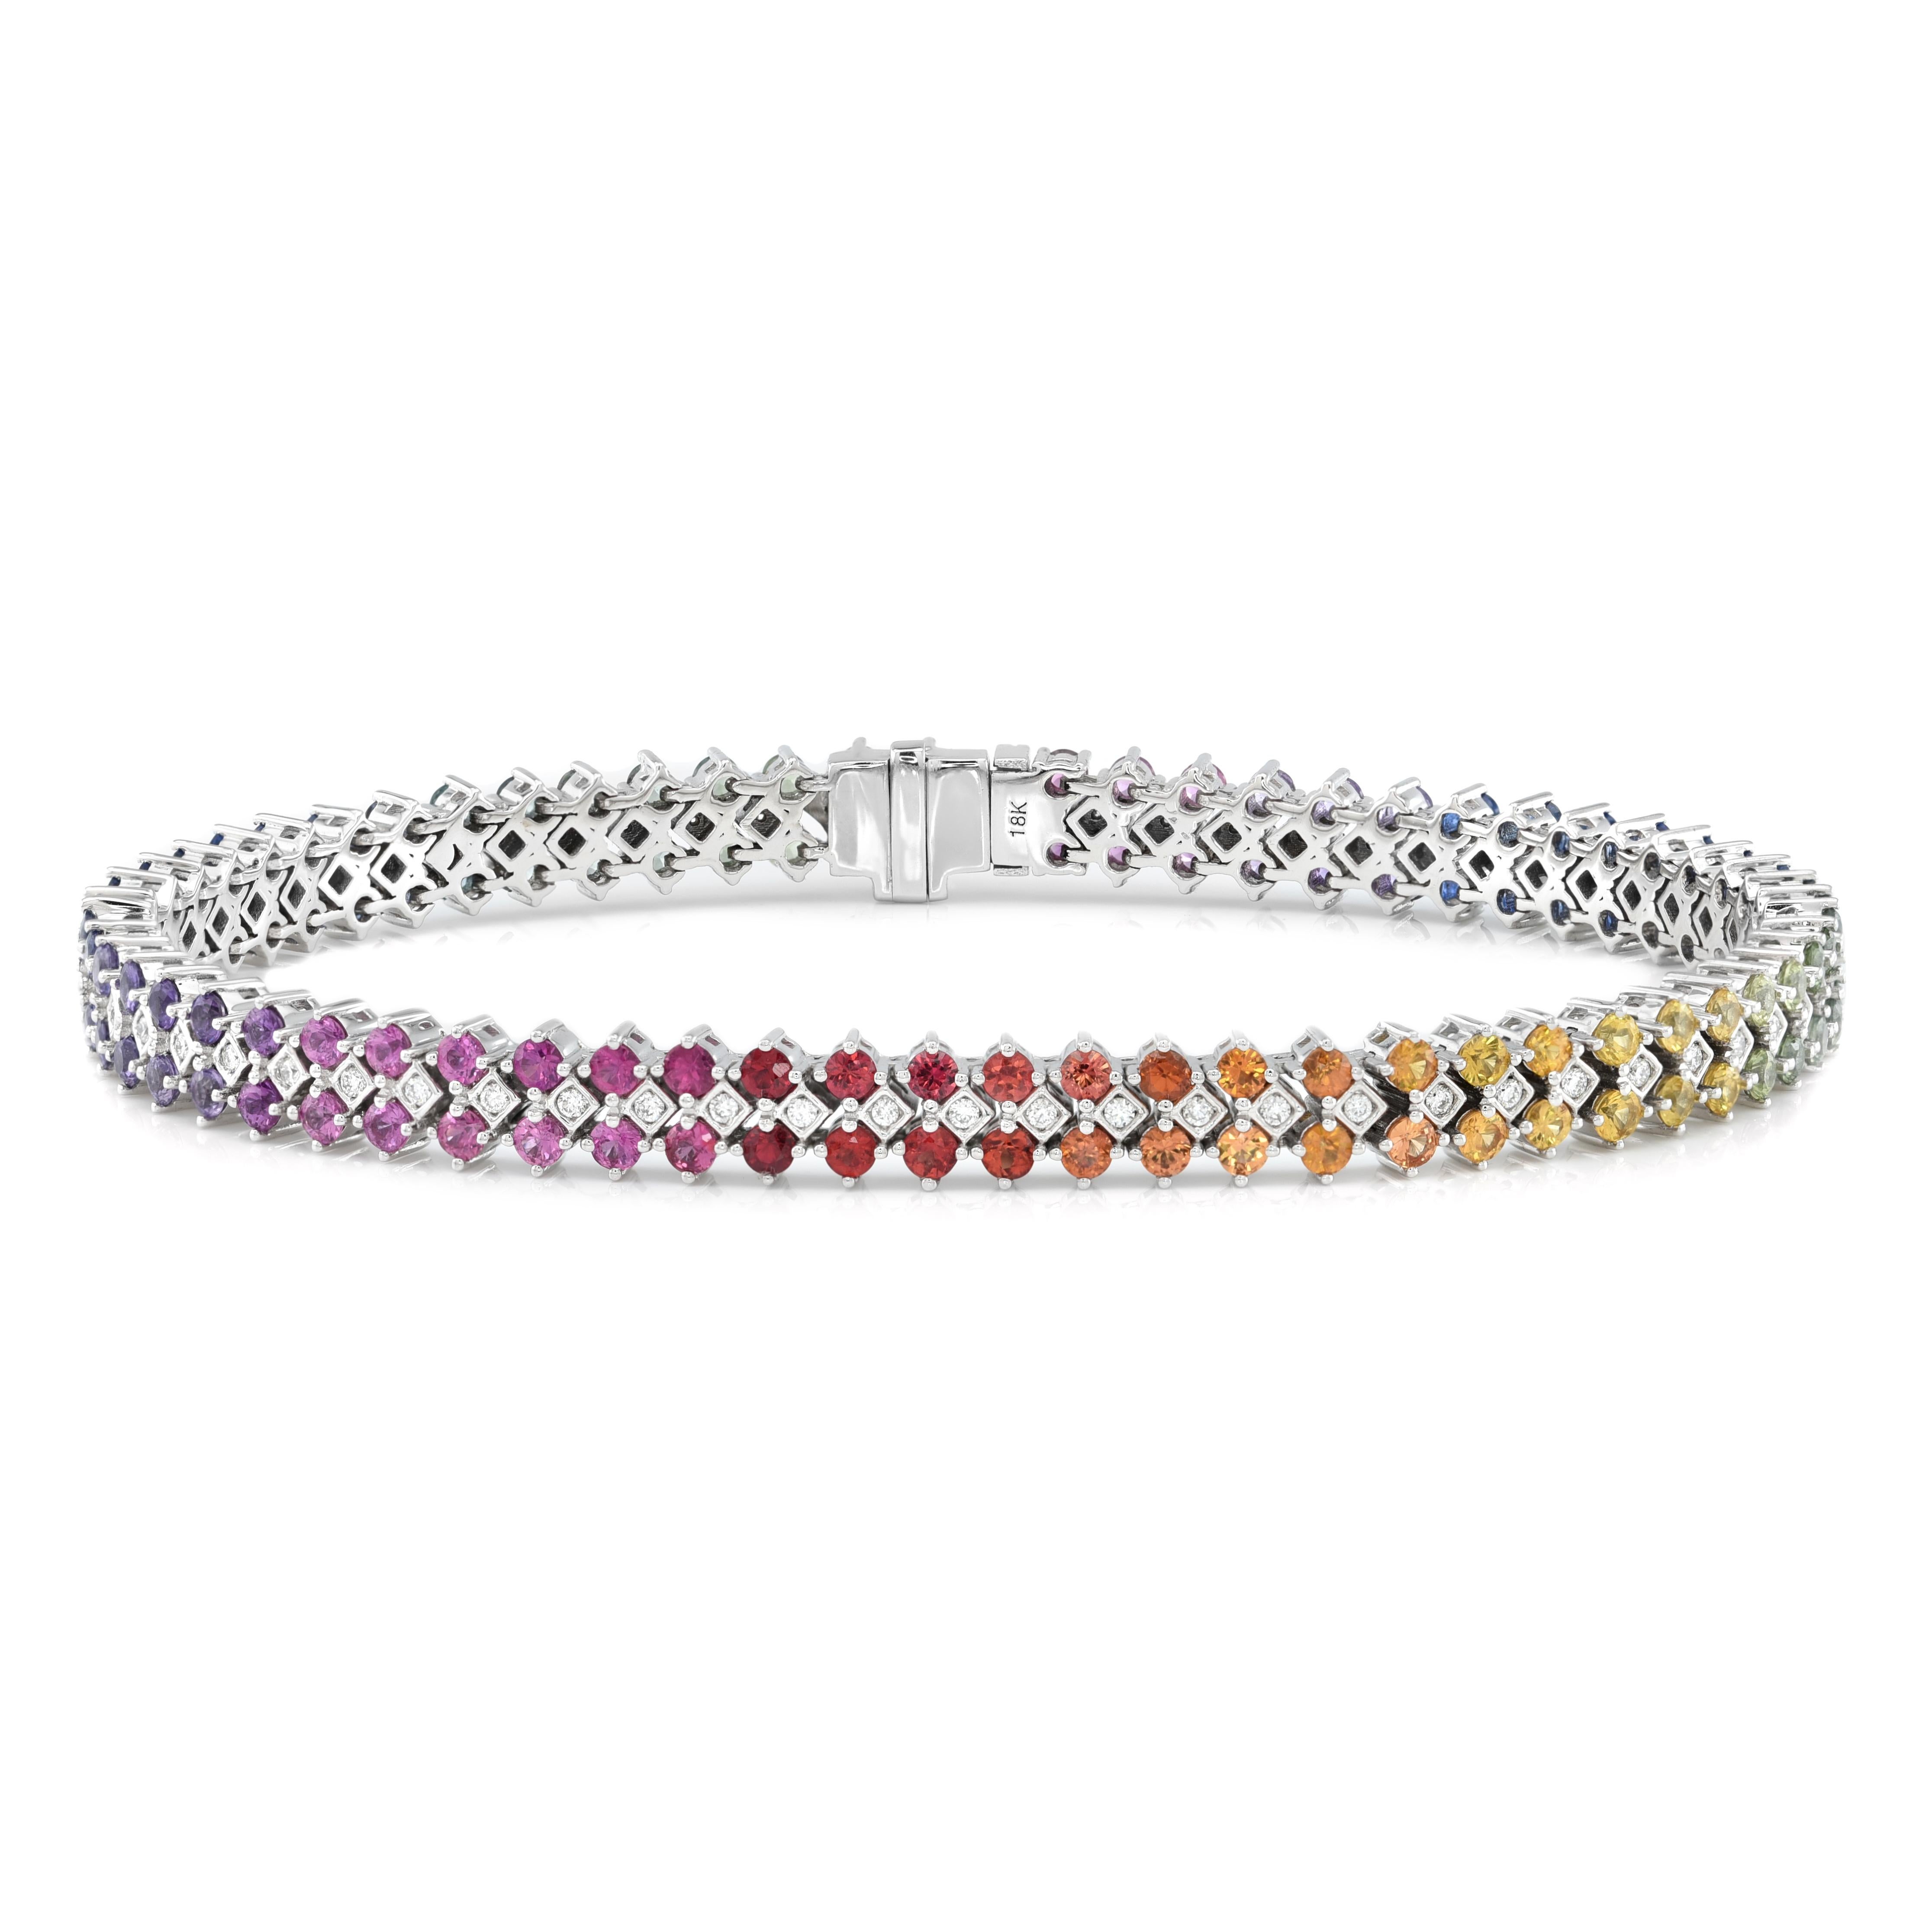 4.60 Carats Rainbow Color Sapphires Diamonds set in 18K White Gold Bracelet In New Condition For Sale In Los Angeles, CA